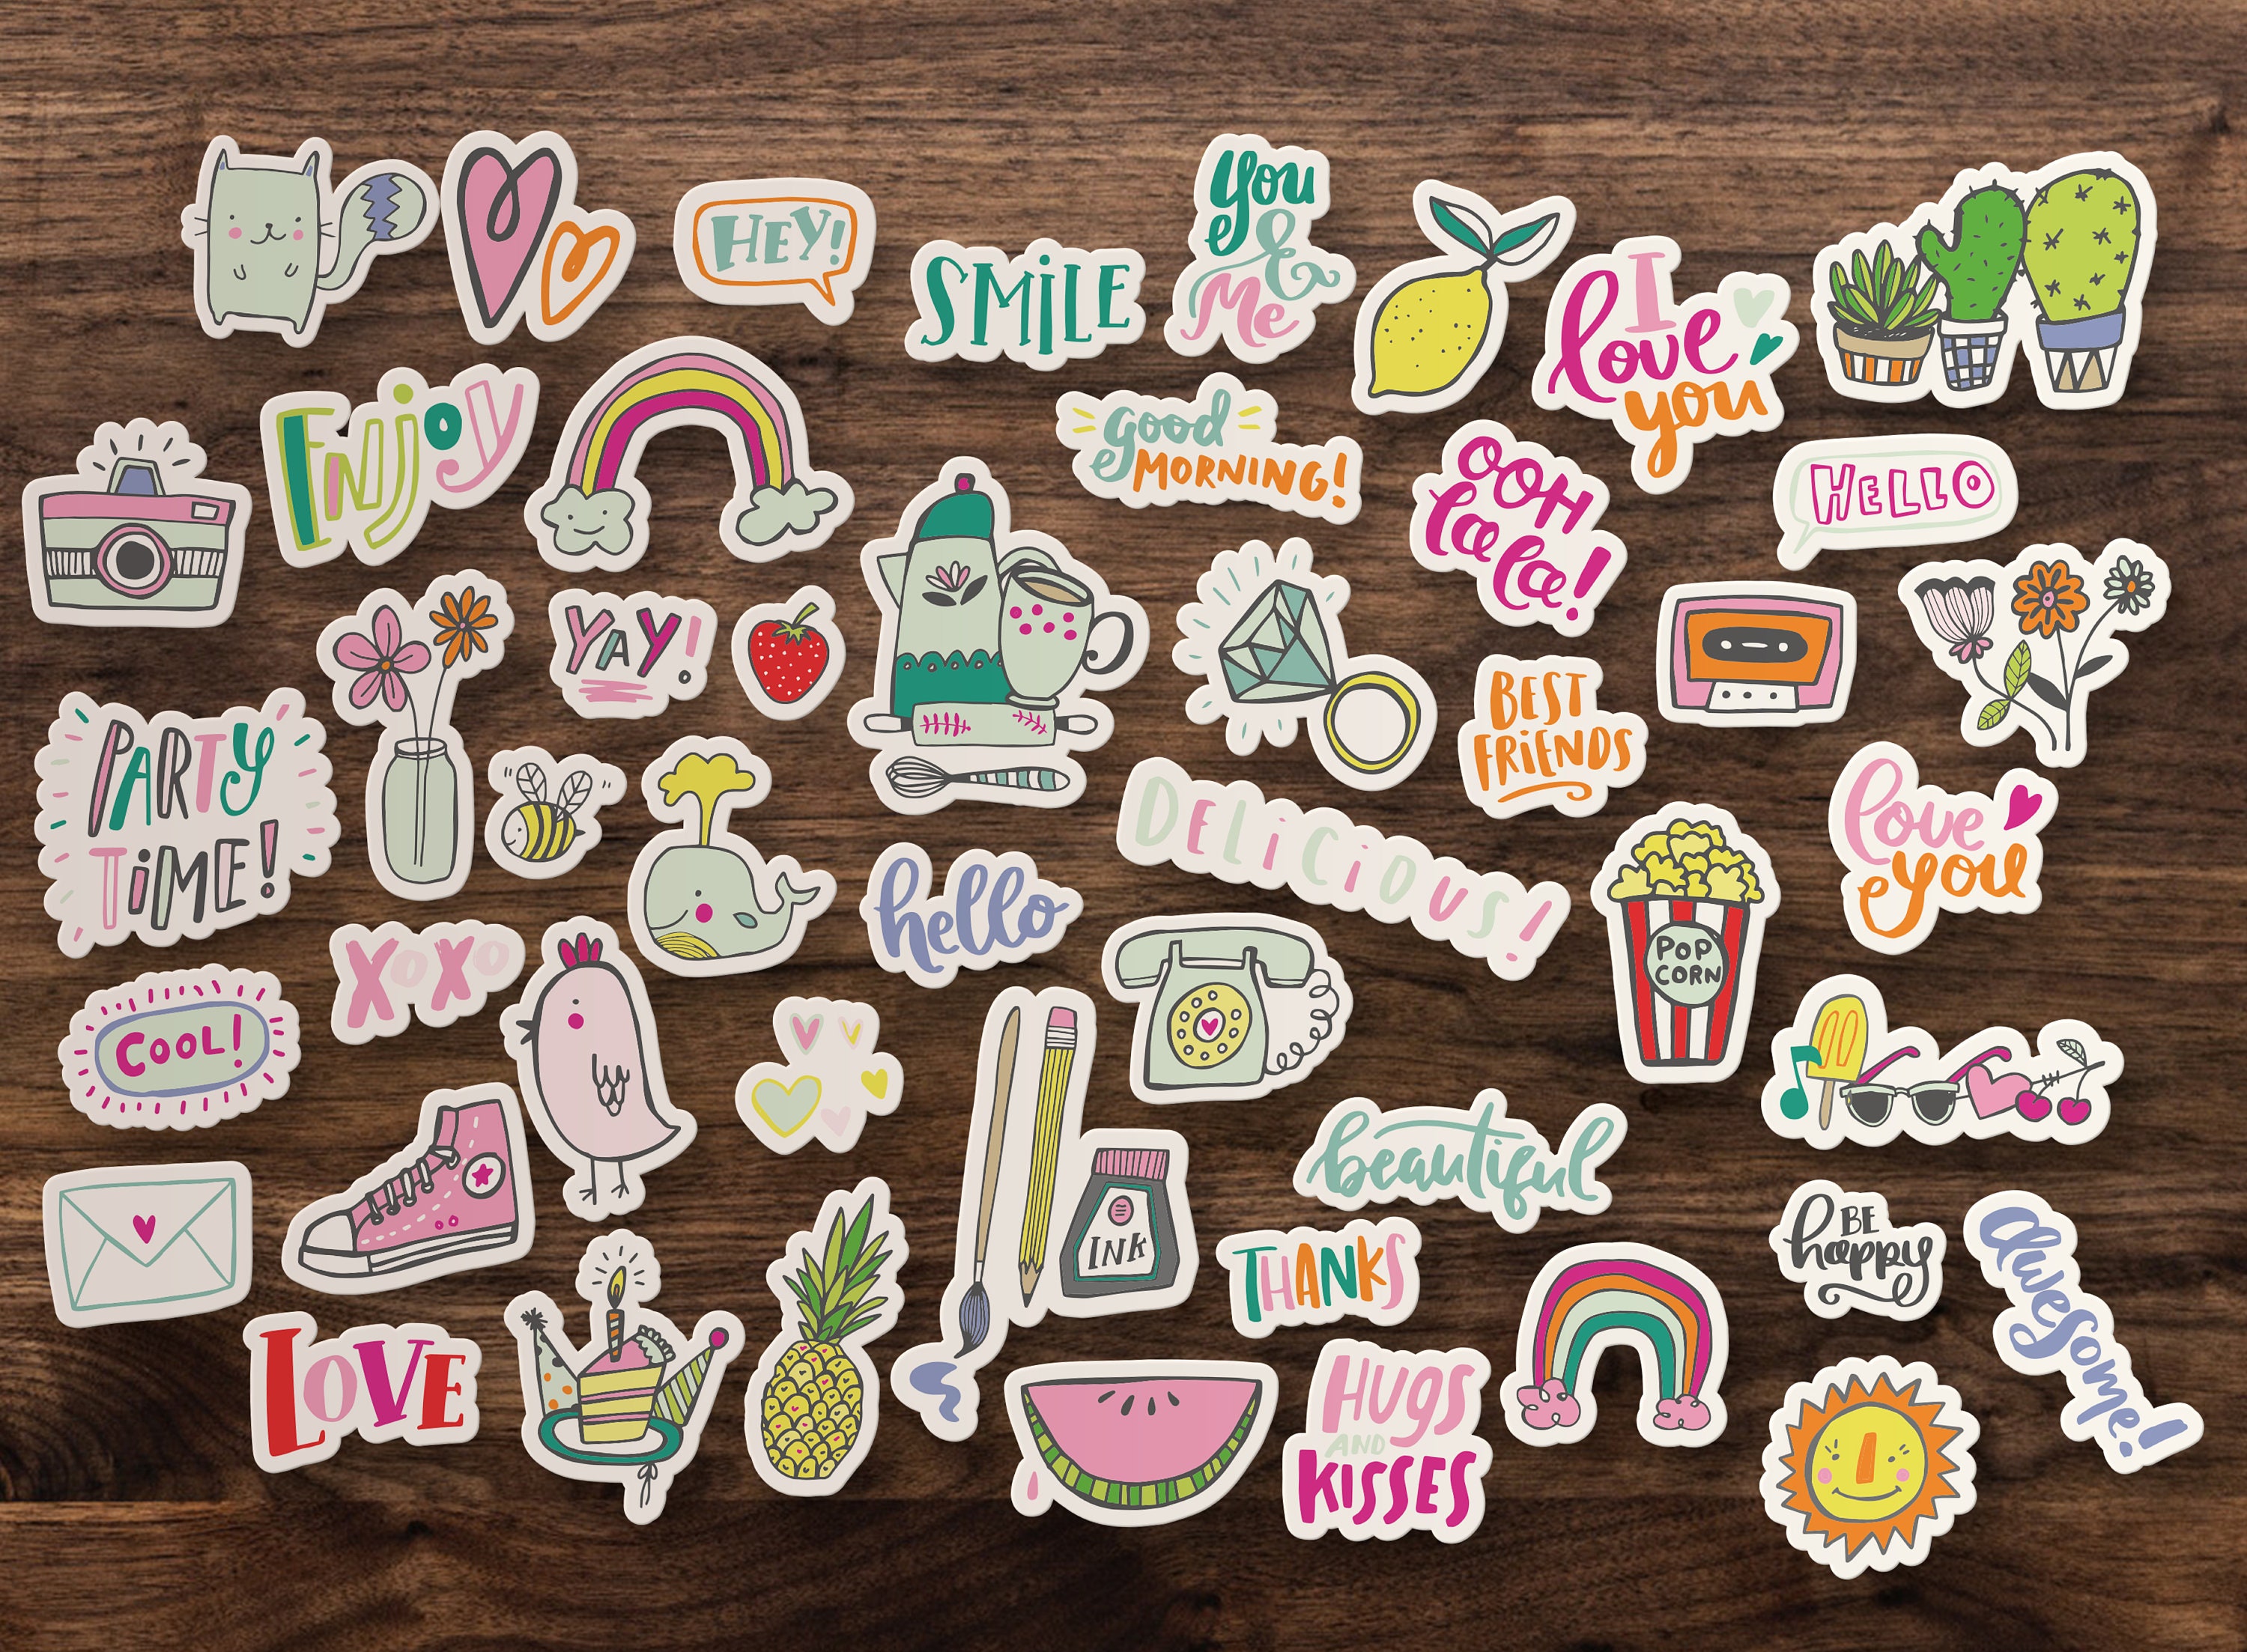 3 Pcs Rub on Stickers Pack/ Cute Stickers for Journaling and Pen Pals, Cute  Stickers for Collages and Artists 